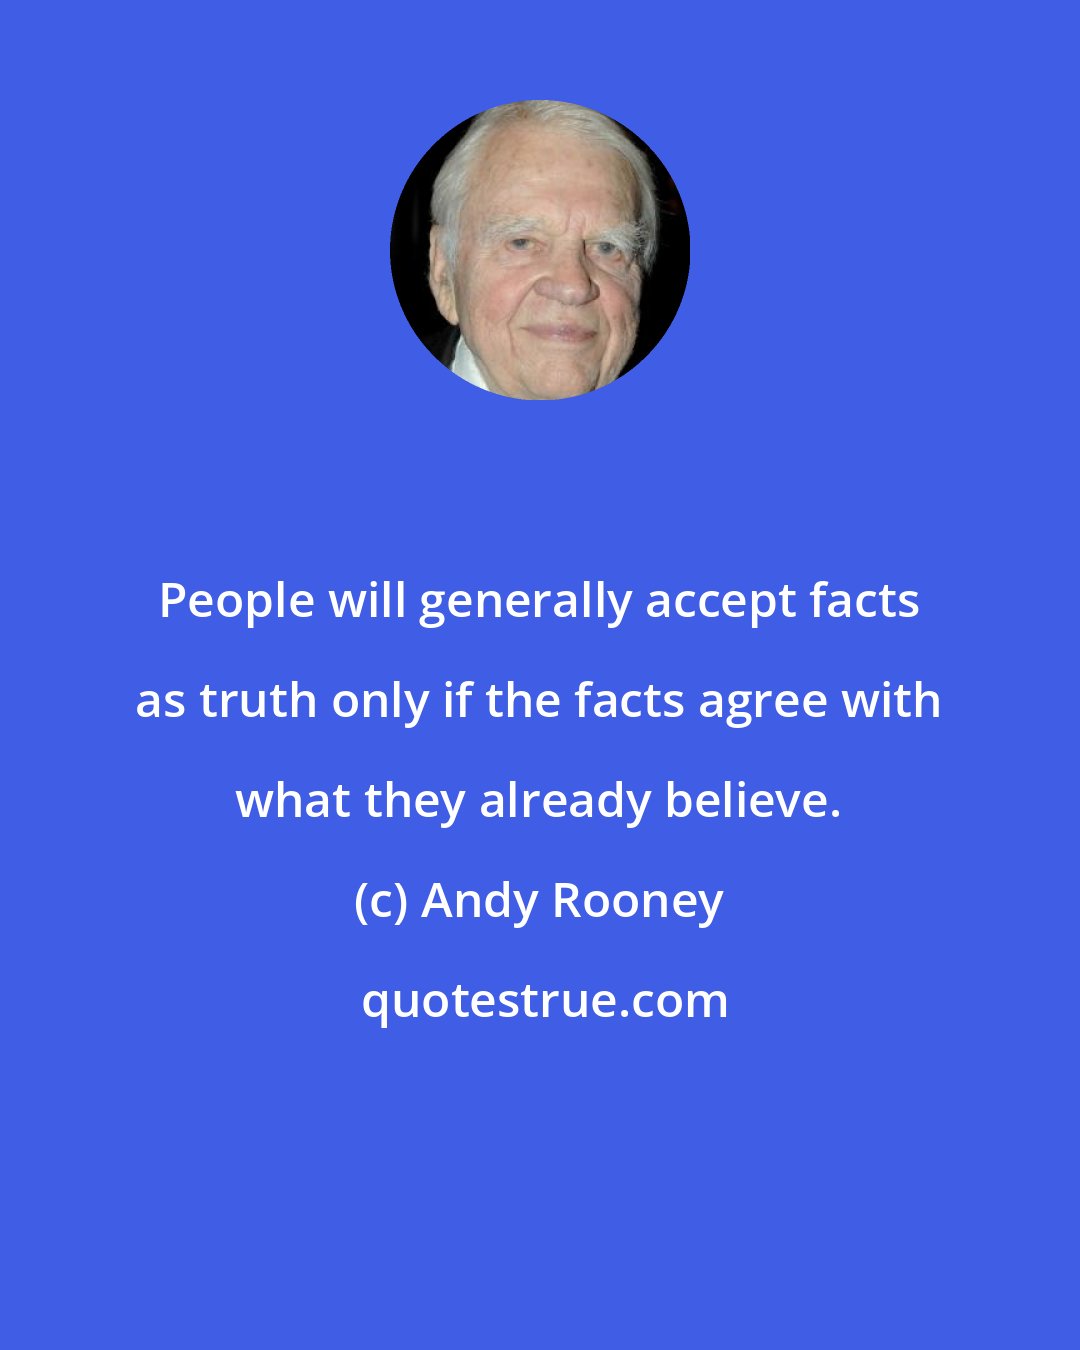 Andy Rooney: People will generally accept facts as truth only if the facts agree with what they already believe.